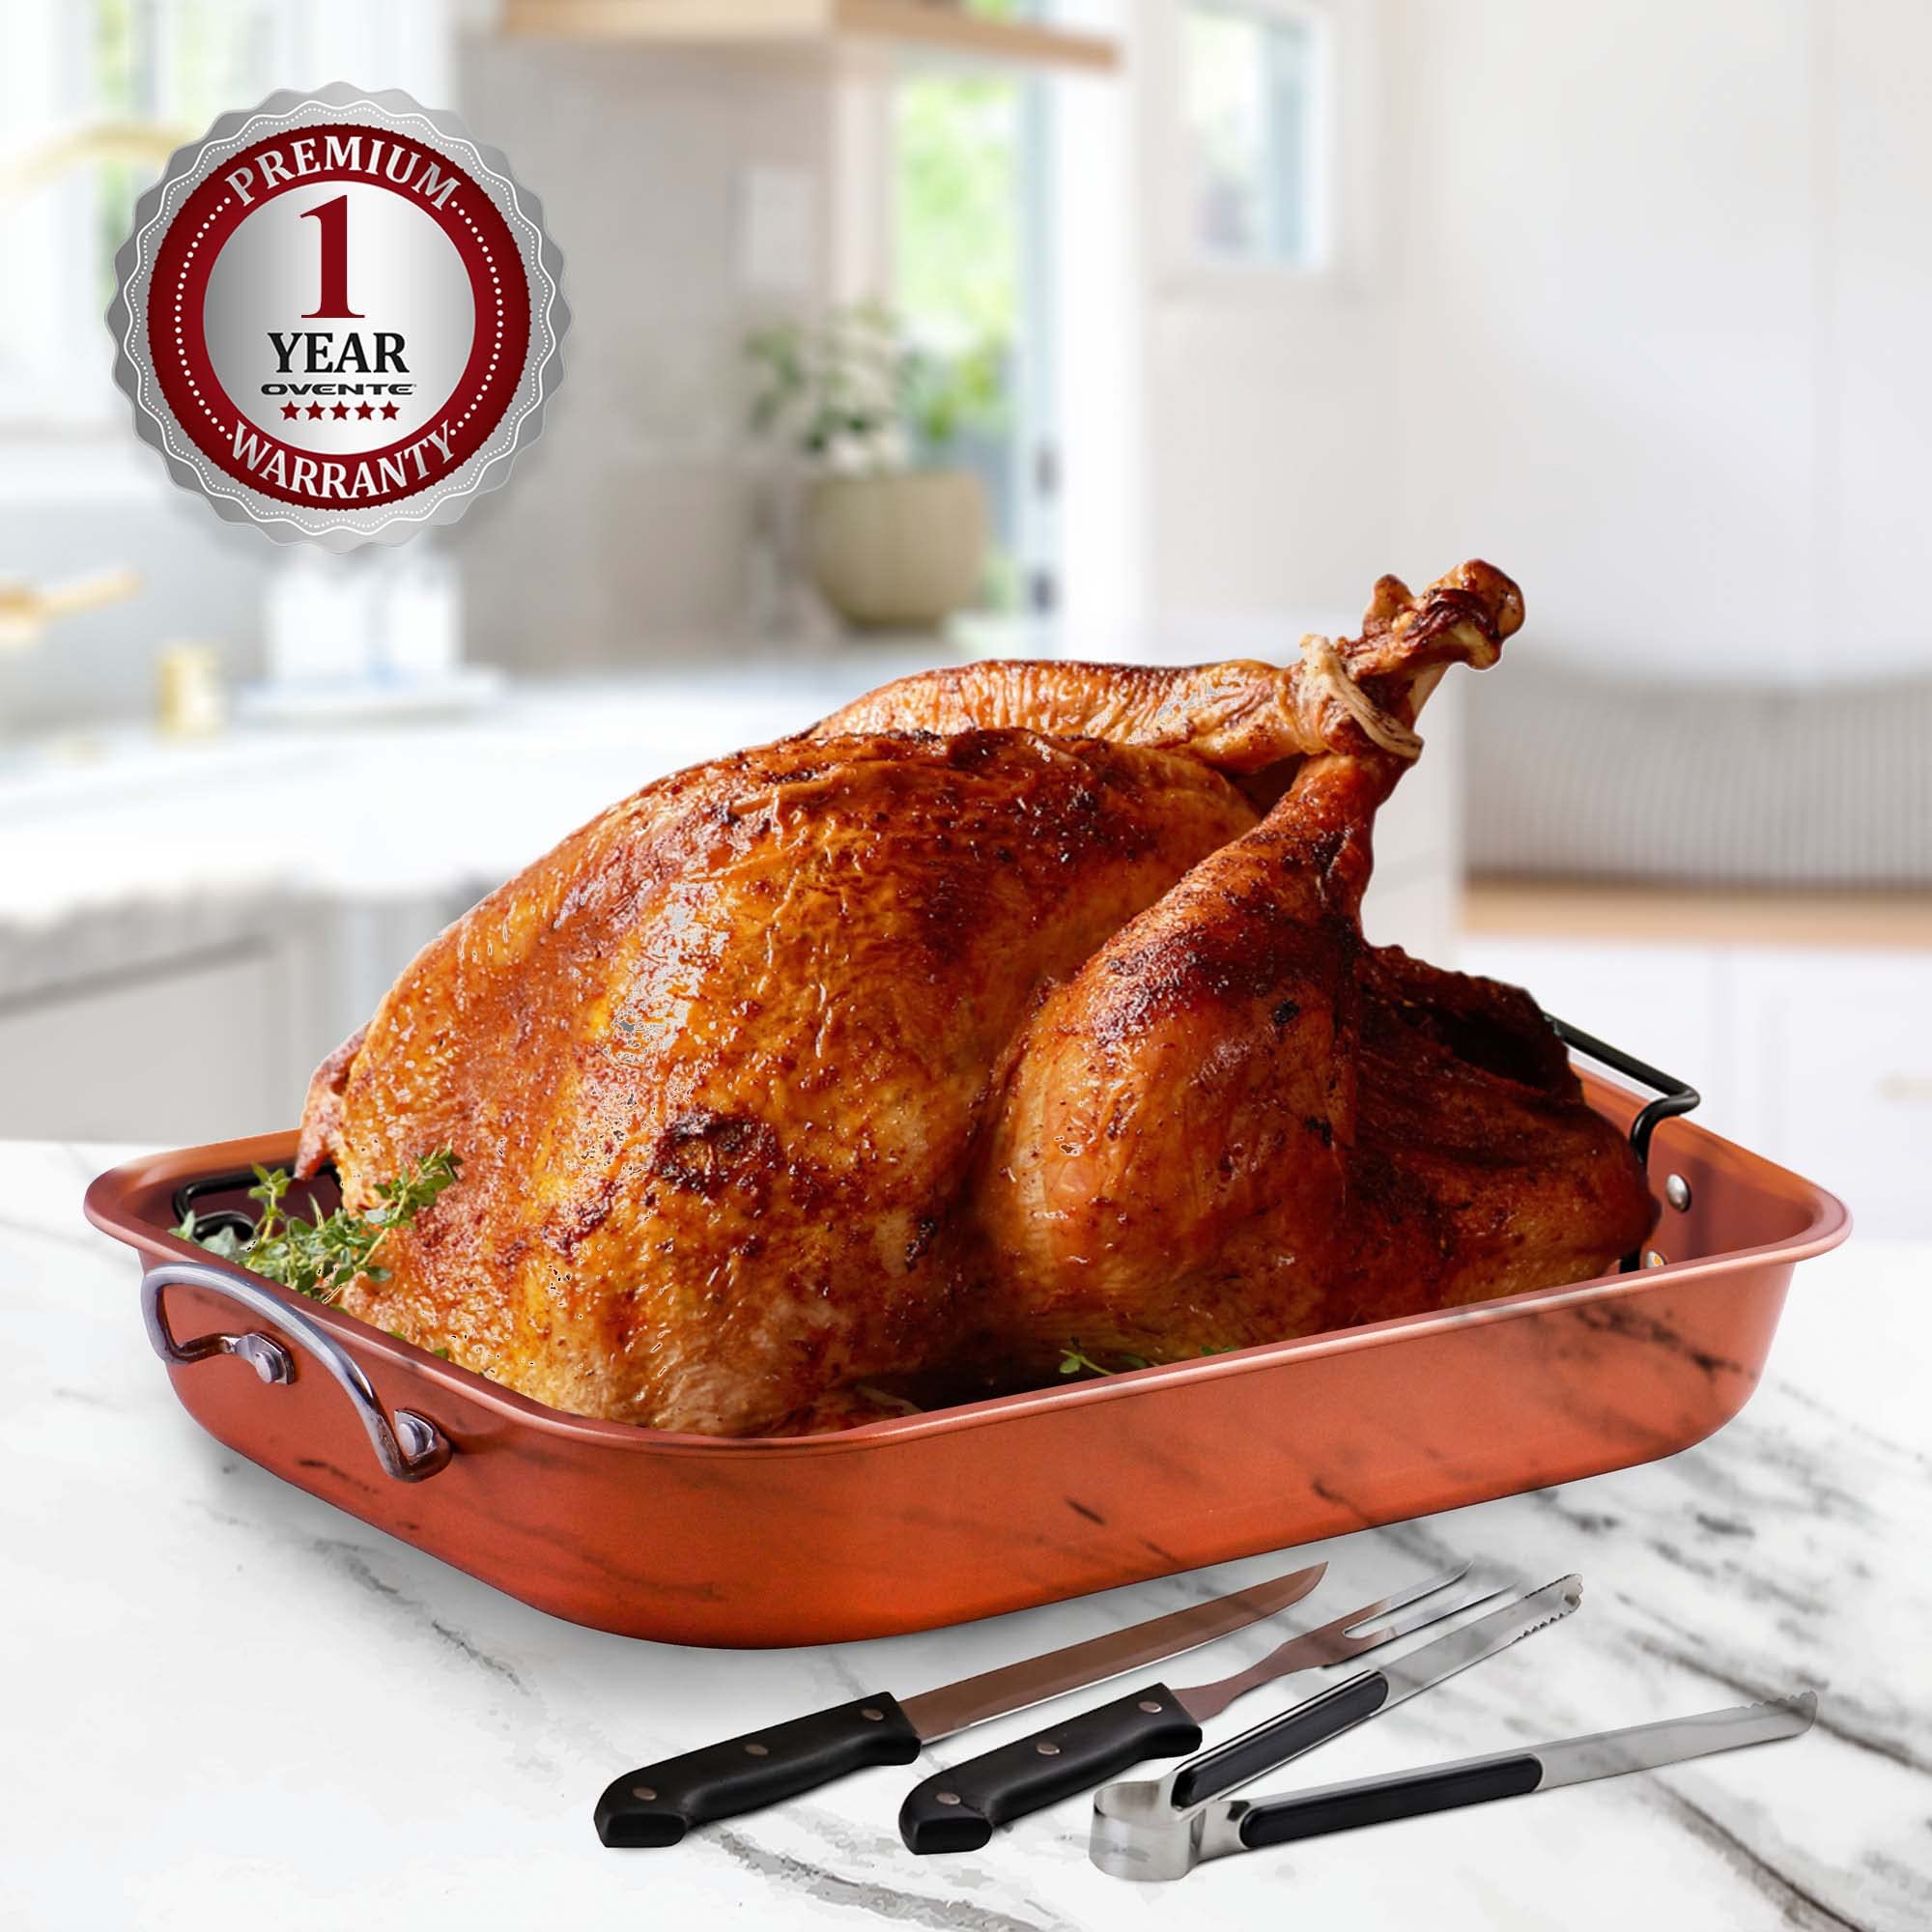 OVENTE Kitchen Oven Roasting Pan Nonstick Carbon Steel Baking Tray with V-Shaped Design Rack and Carving Knife Set, Easy Clean Dishwasher Safe & Cooking Roasting Turkey, Chicken, Copper CWR24619CO